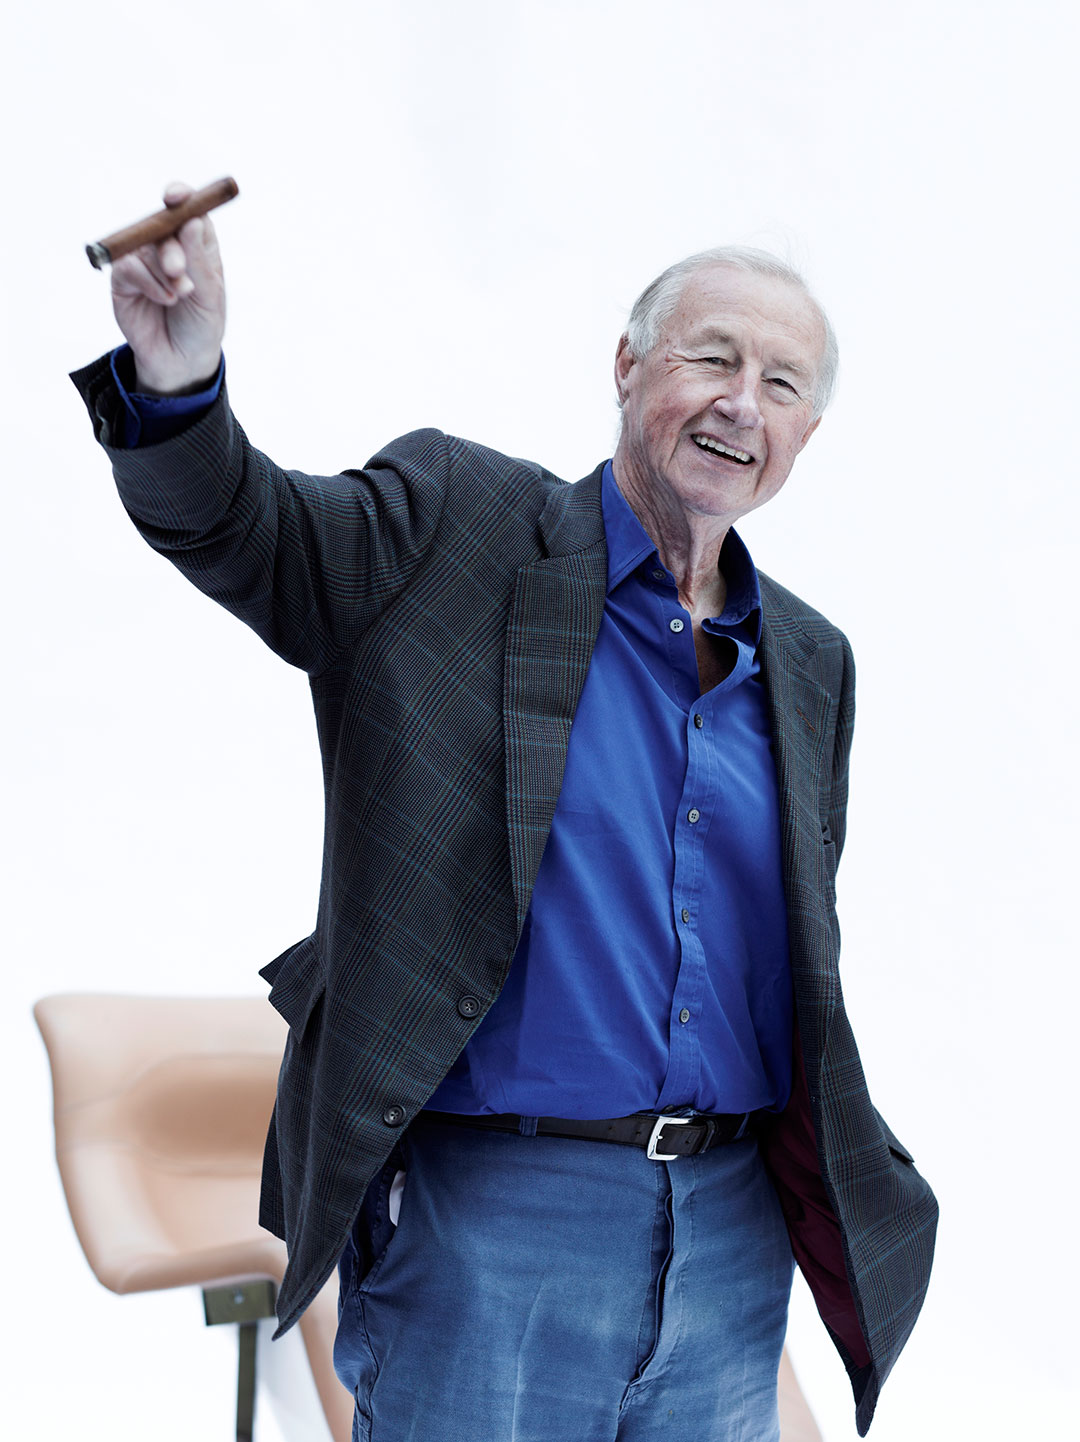 Sir Terence Conran. Image courtesy of the Design Museum